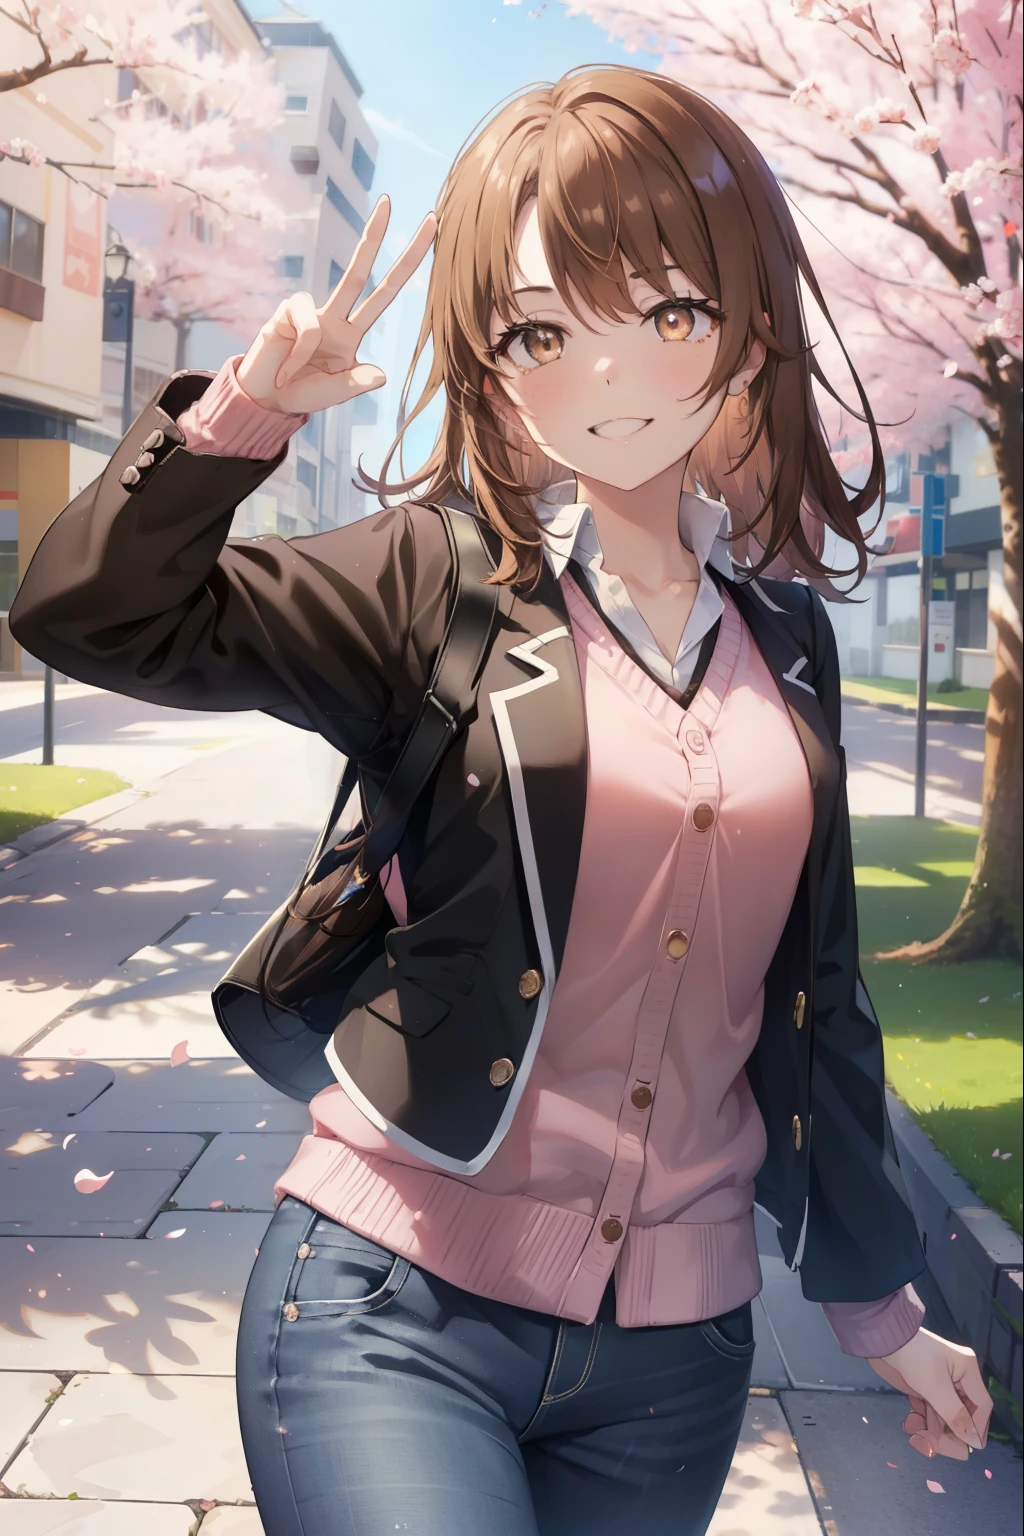 irohaisshiki, iroha isshiki, long hair, brown hair, (brown eyes:1.5), happy smile, smile, open your mouth,Put your right hand over your mouth and make a peace sign, 1 girl,pink hoodie,short denim pants,black tights,short boots,independent&#39;with your back to the wall、The cherry blossoms have bloomed,Cherry blossoms are scattered,
break indoors, Cherry blossom tree-lined path,
break looking at viewer,Upper body,
break (masterpiece:1.2), highest quality, High resolution, unity 8k wallpaper, (shape:0.8), (fine and beautiful eyes:1.6), highly detailed face, perfect lighting, Very detailed CG, (perfect hands, perfect anatomy),